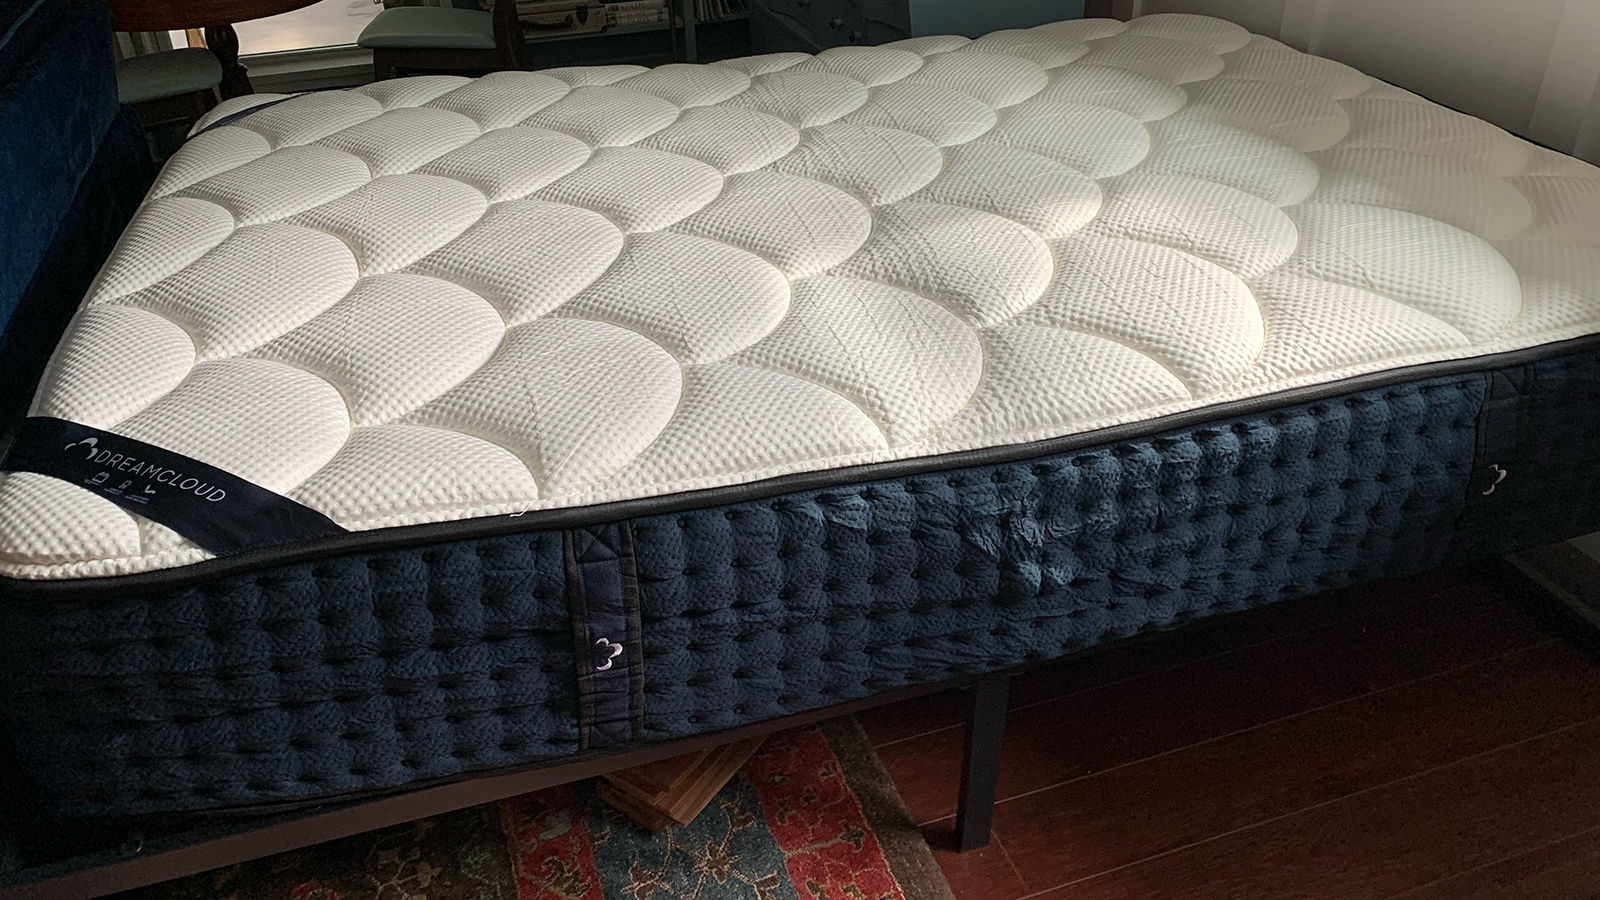 DreamCloud Luxury Hybrid Mattress uncovered on a bed frame